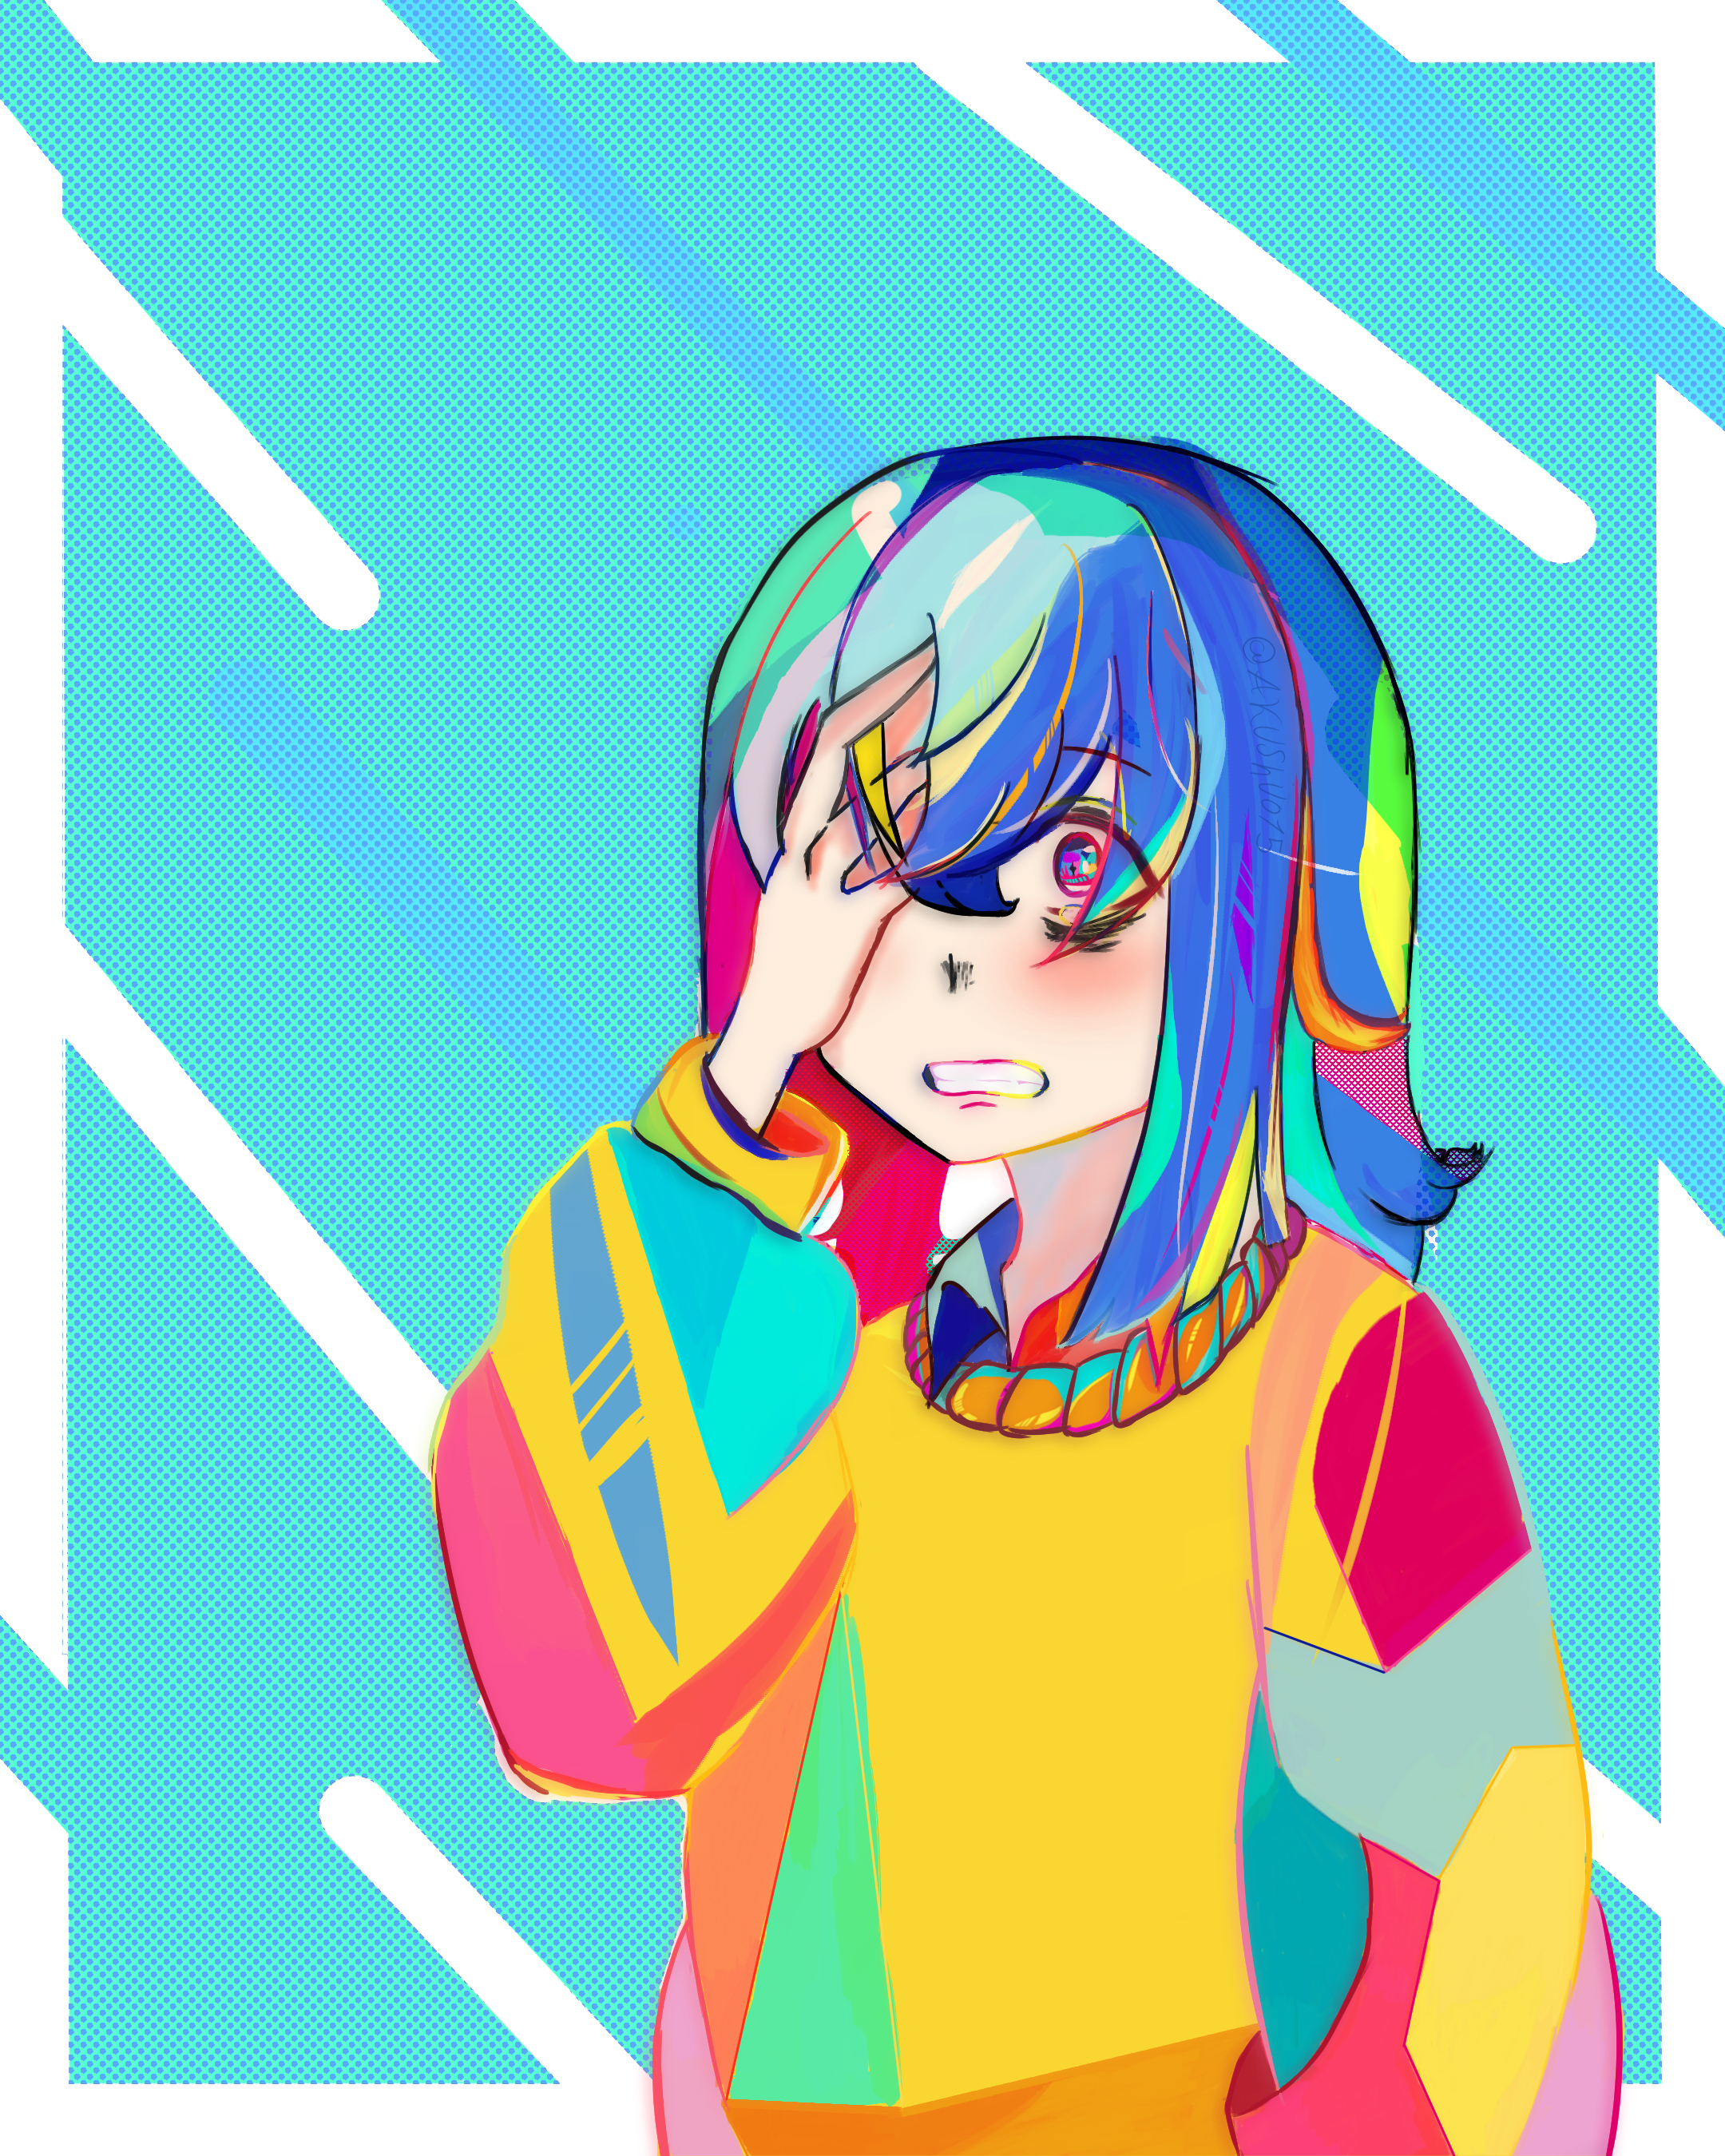 Anime 2160x2700 anime girls Pixiv artwork abstract 2D yellow canvas painting portrait display one eye obstructed colorful simple background minimalism